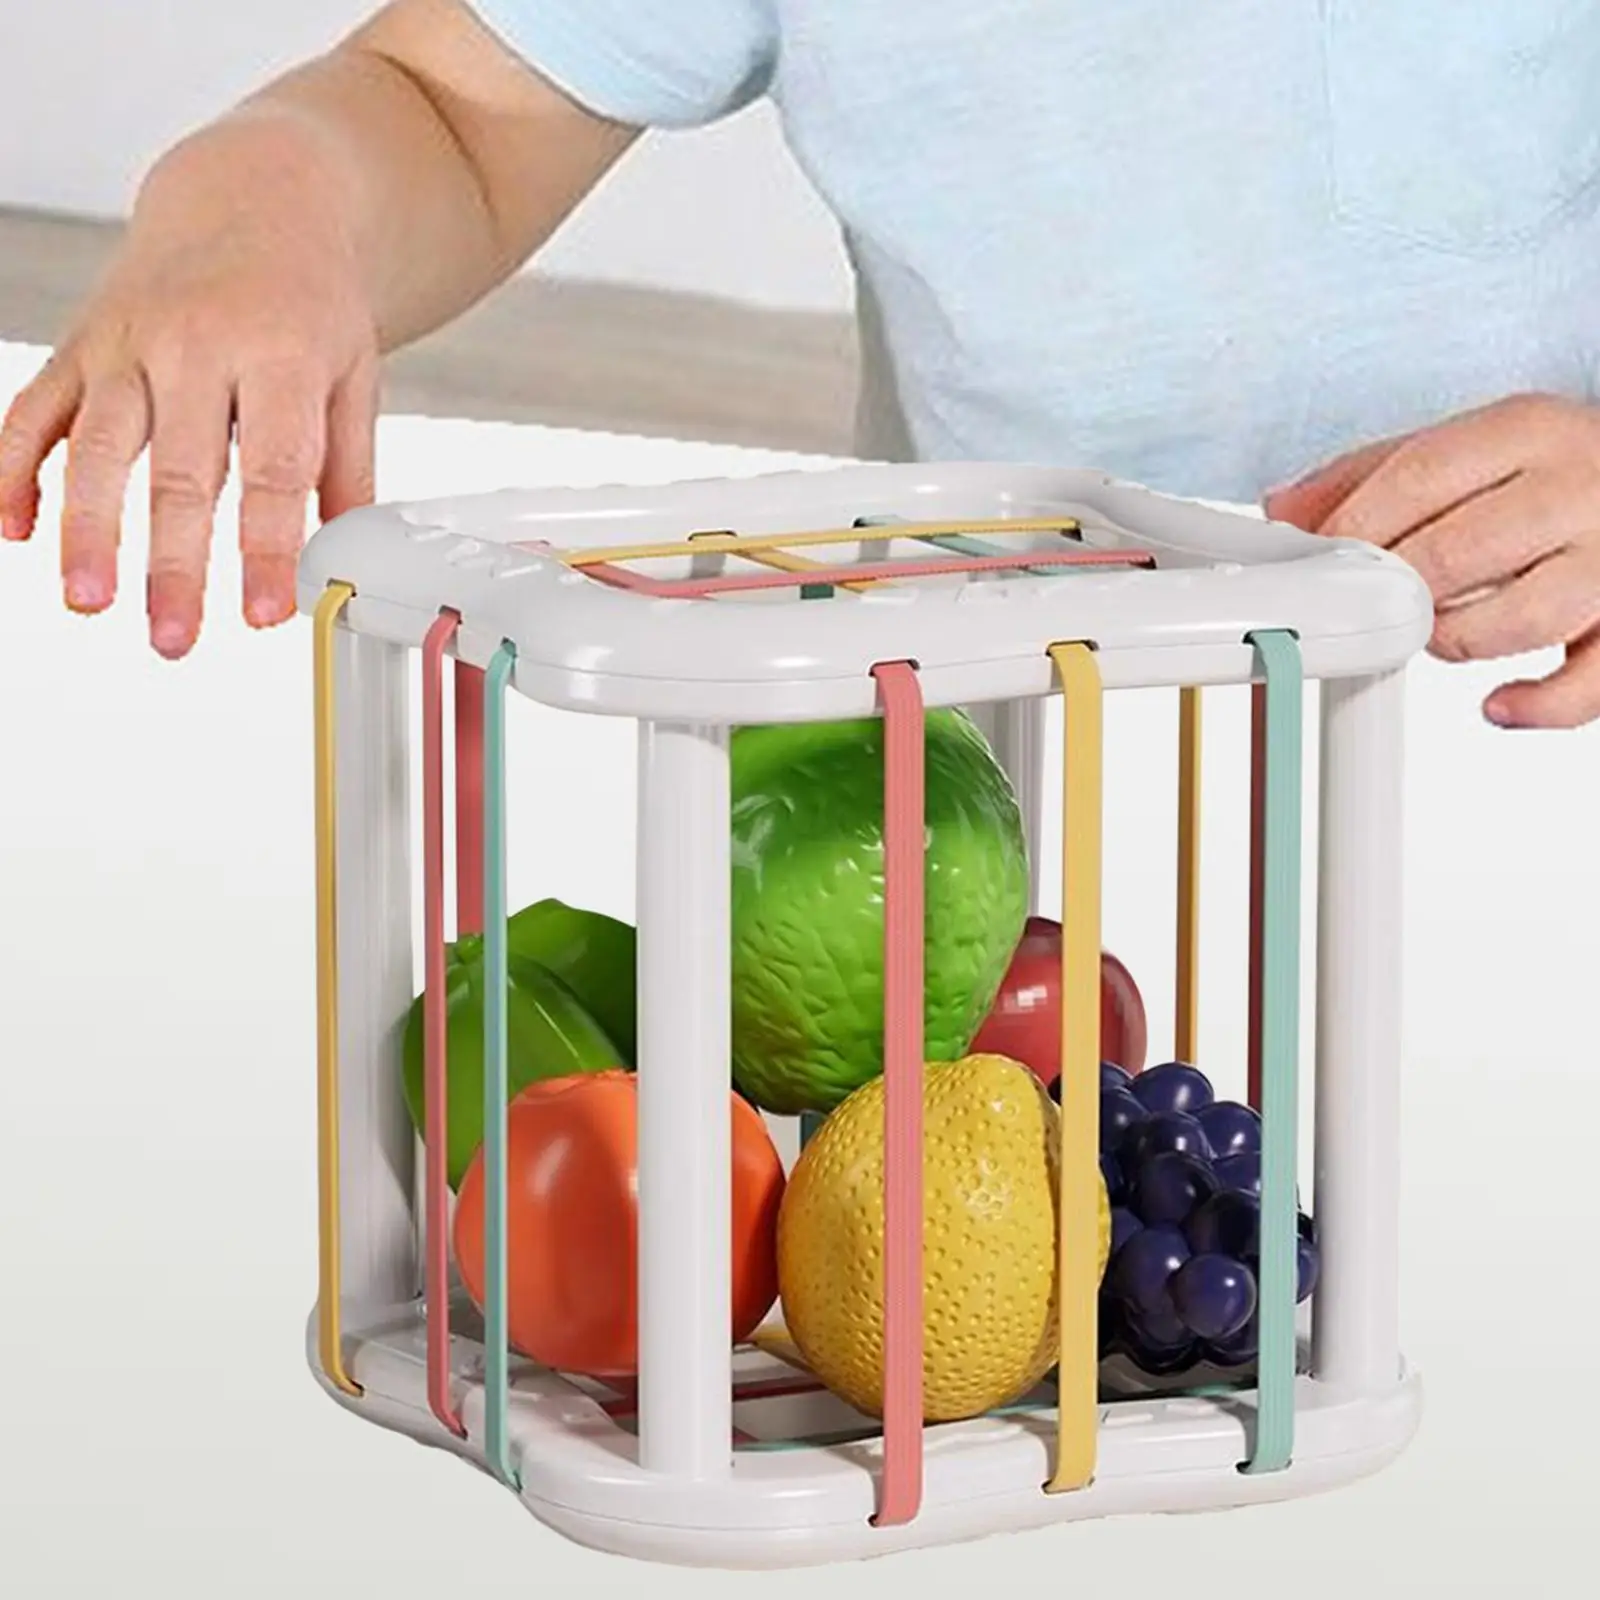 Sensory Bin with Elastic Rope and 6 Fruits Balls Motor Skills Baby Shape Sorter for Kids Children Age 1 2 3 Holiday Gifts